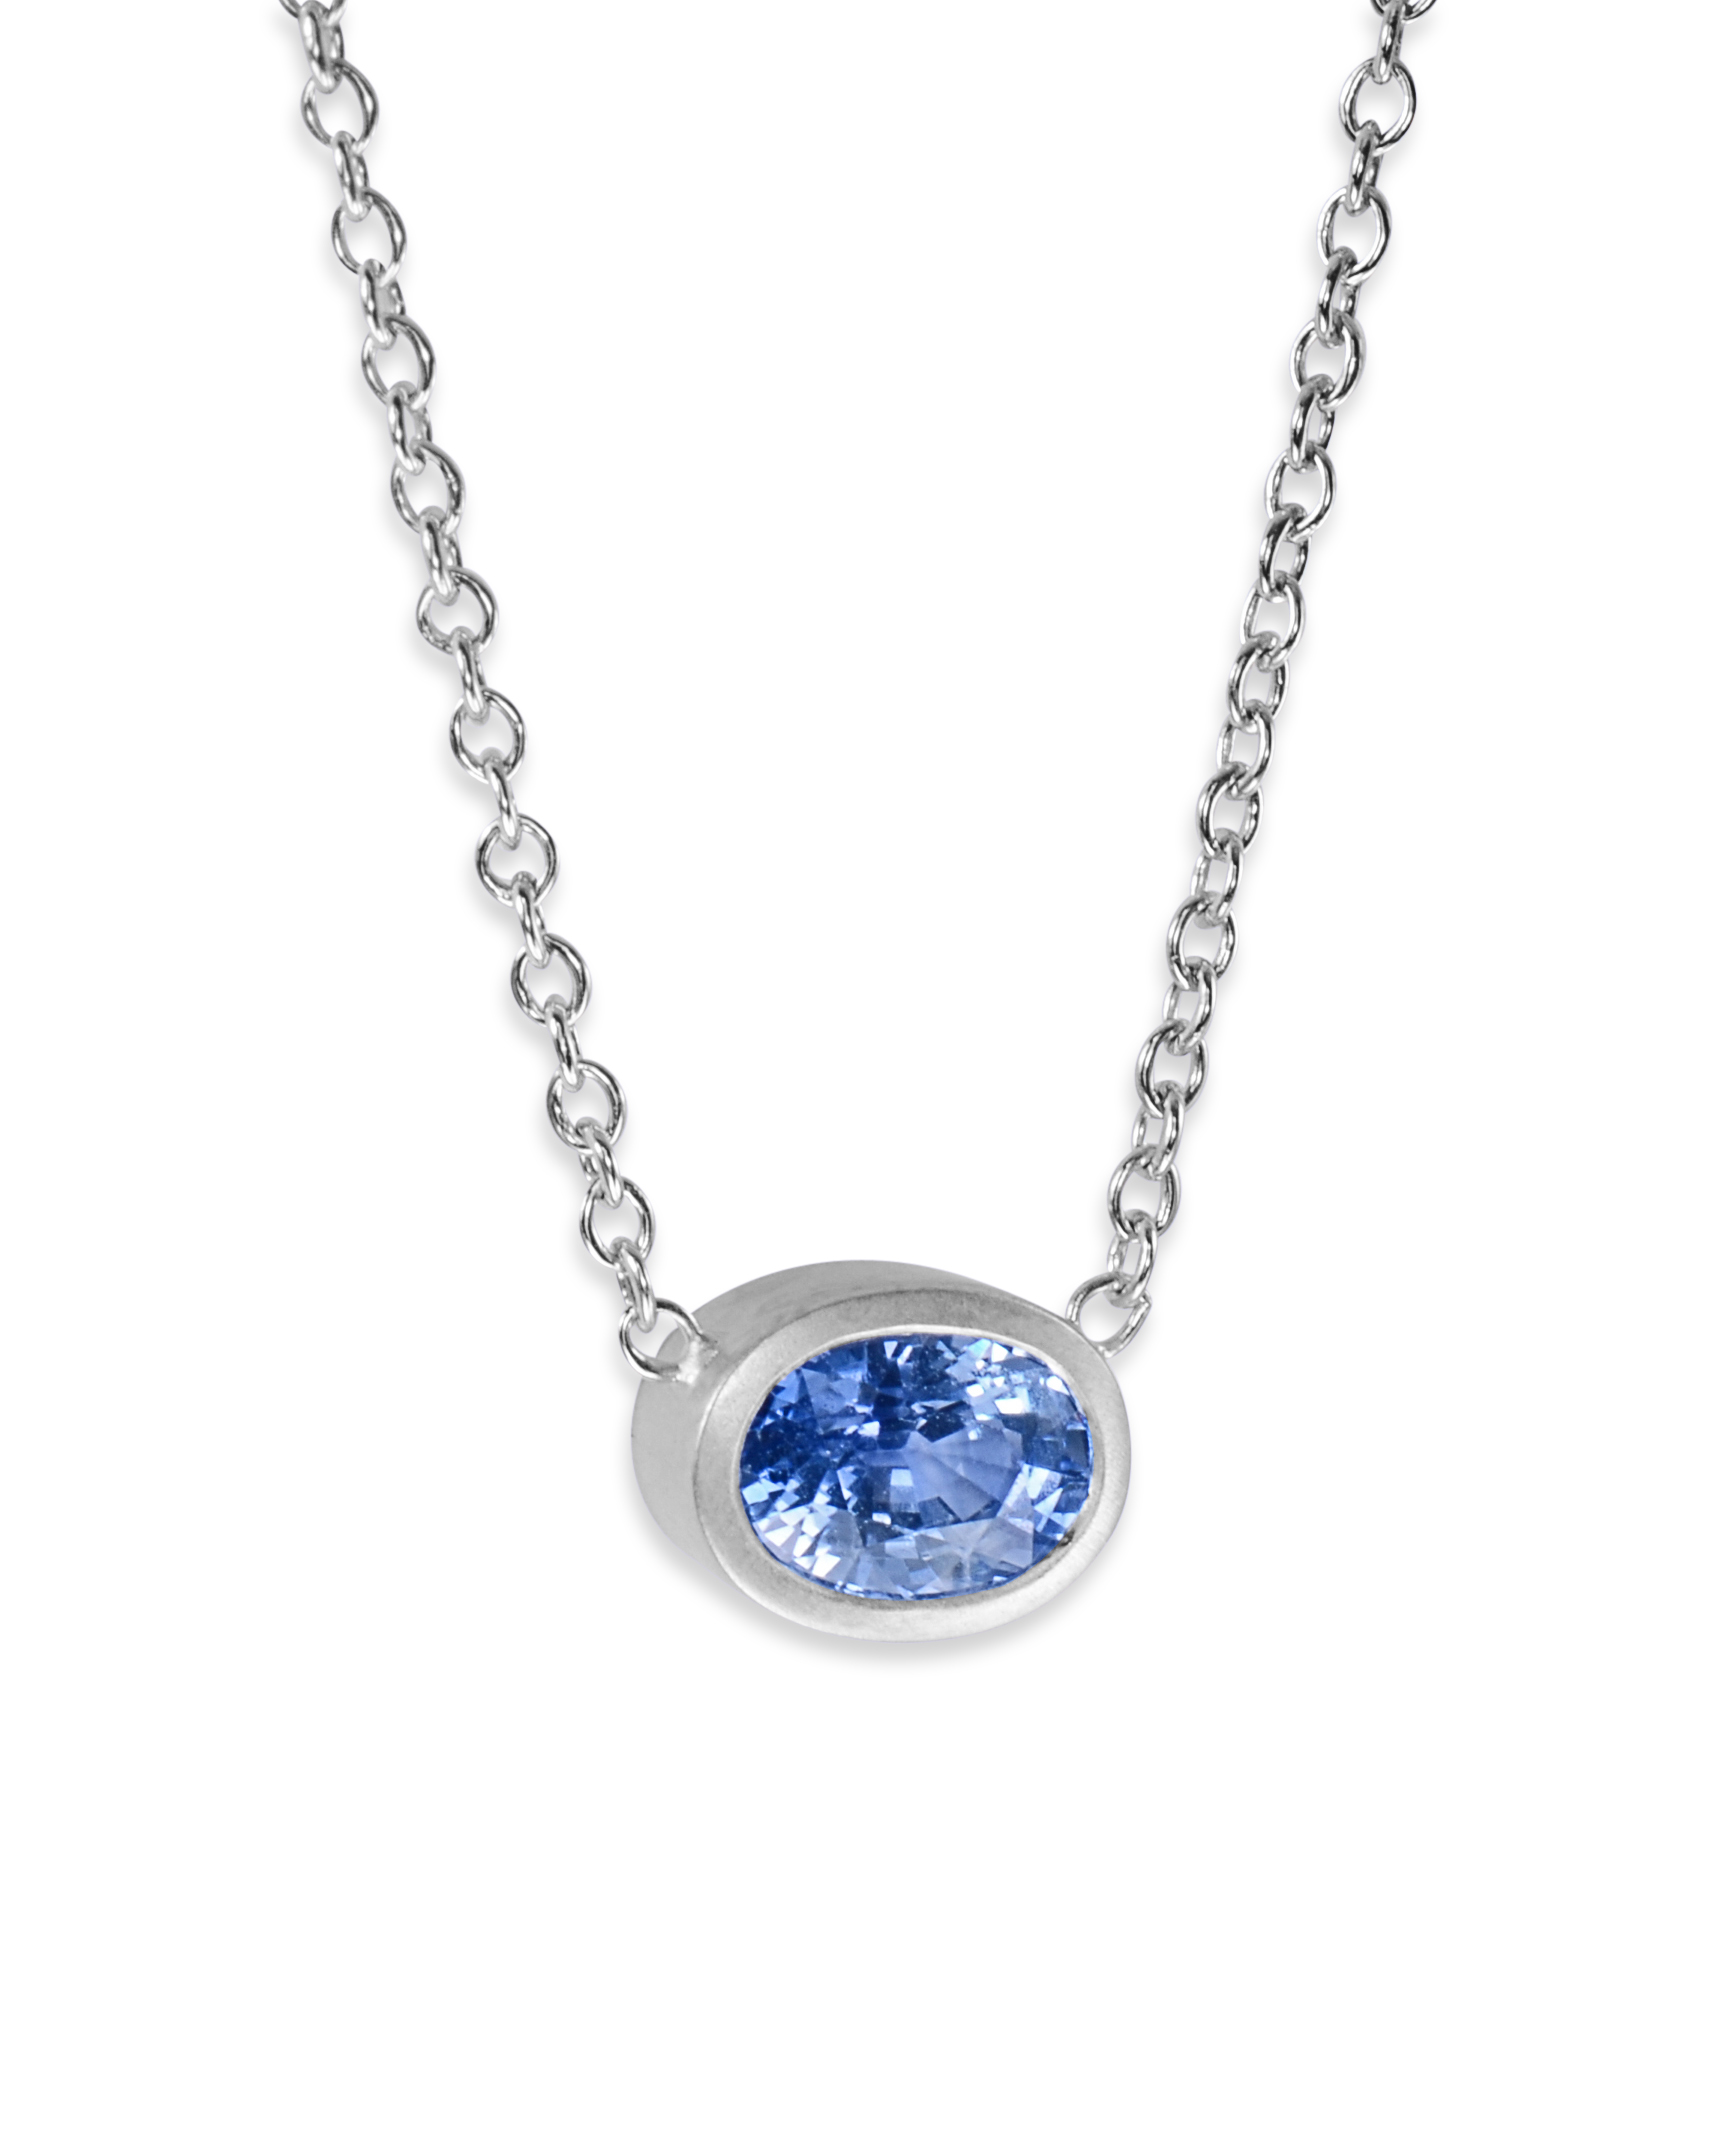 Oval blue sapphire necklace with diamonds - Mills Jewelers